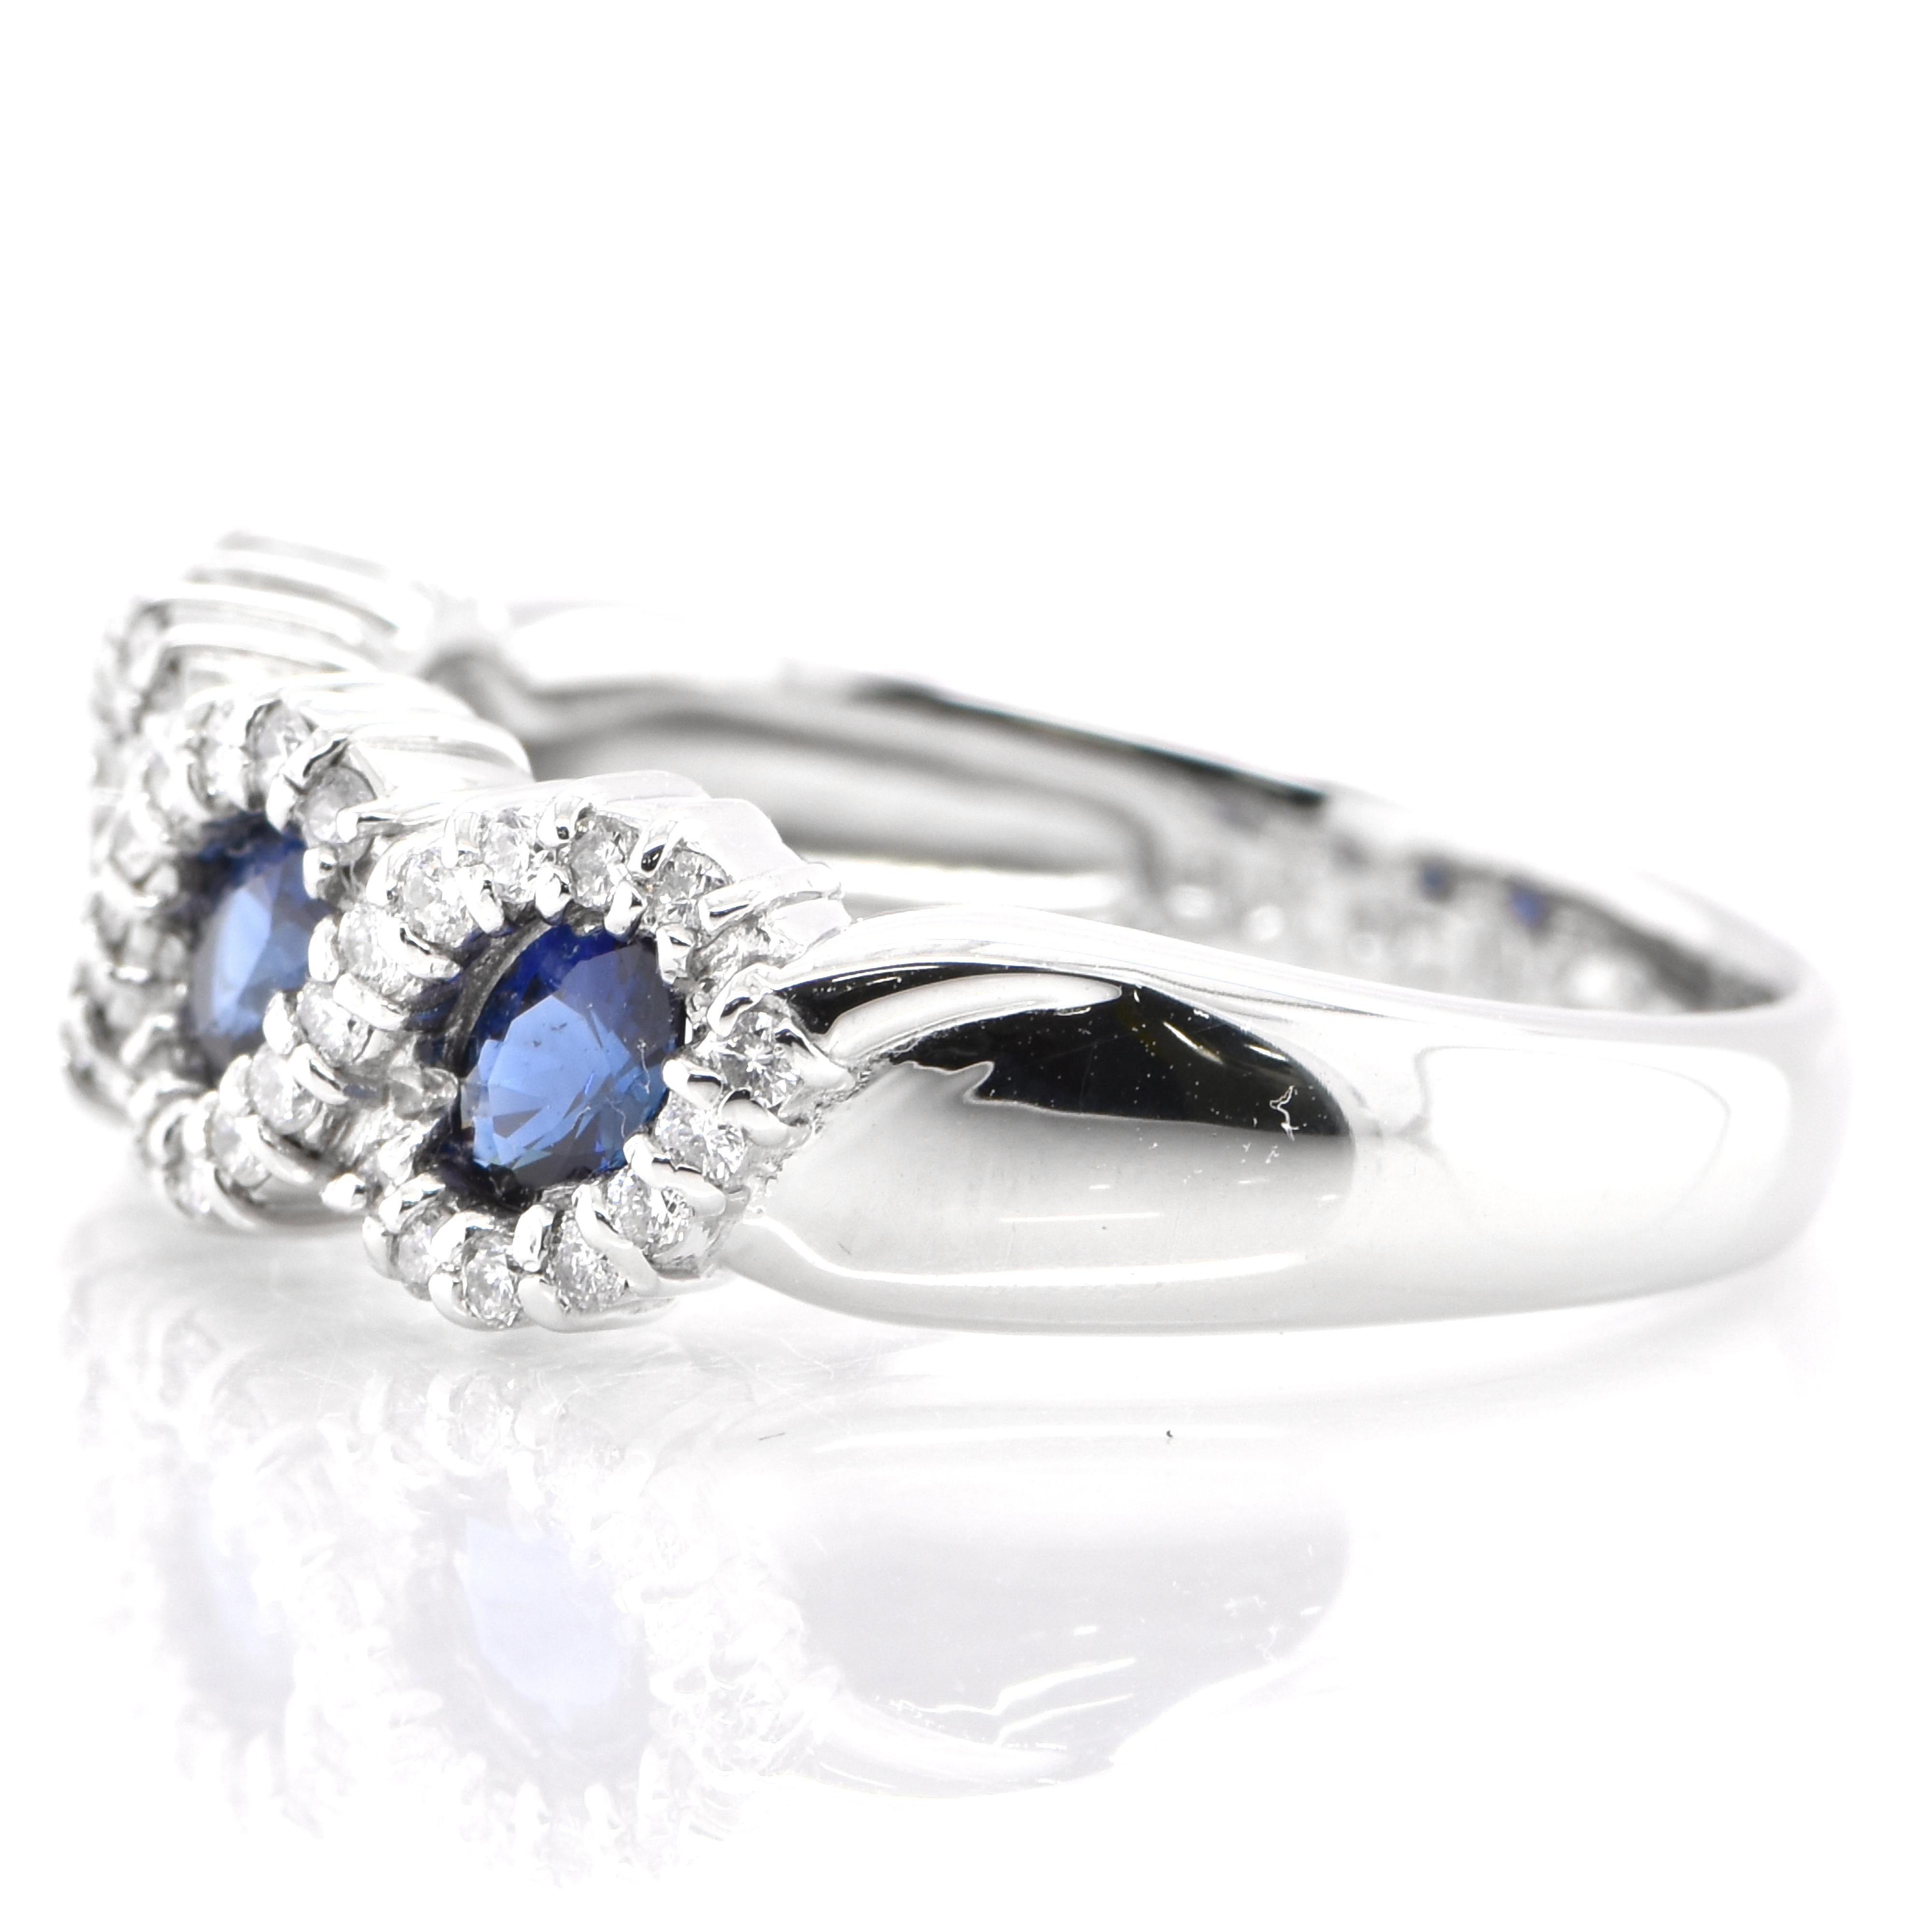 Oval Cut 0.70 Carat Natural Sapphire and Diamond Half Eternity Band Ring Set in Platinum